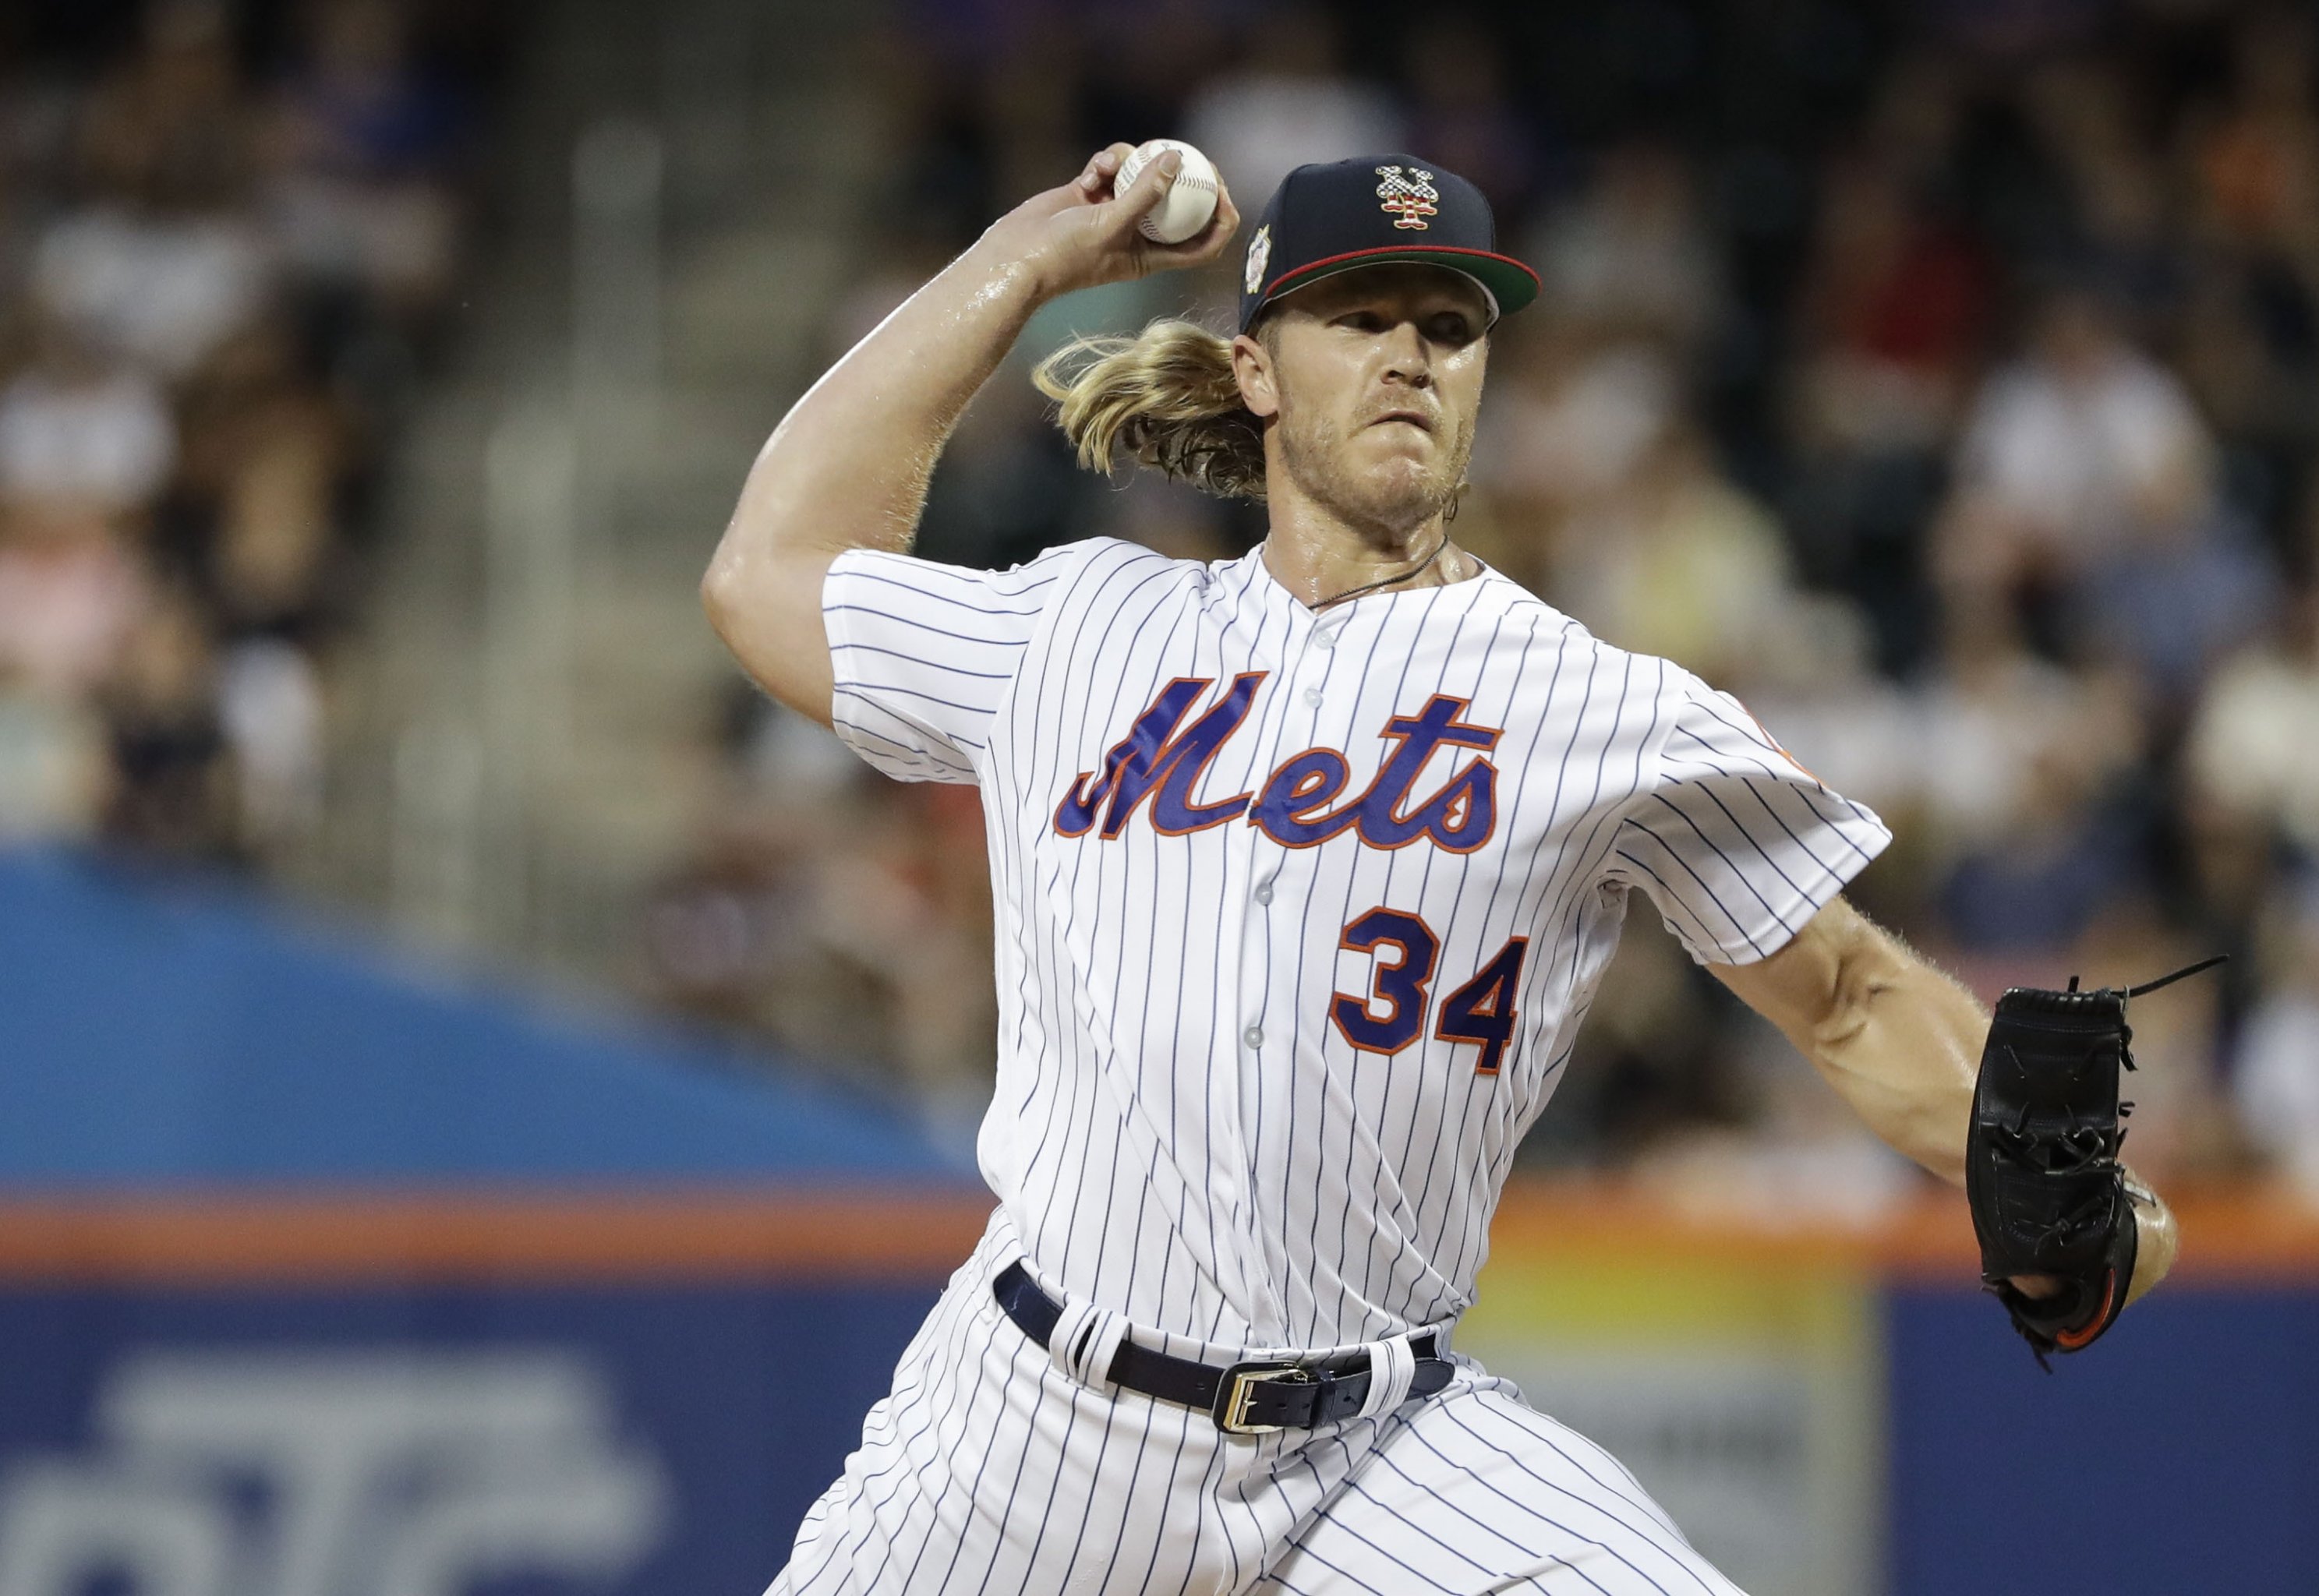 Five teams that should trade for Mets star pitcher Noah Syndergaard